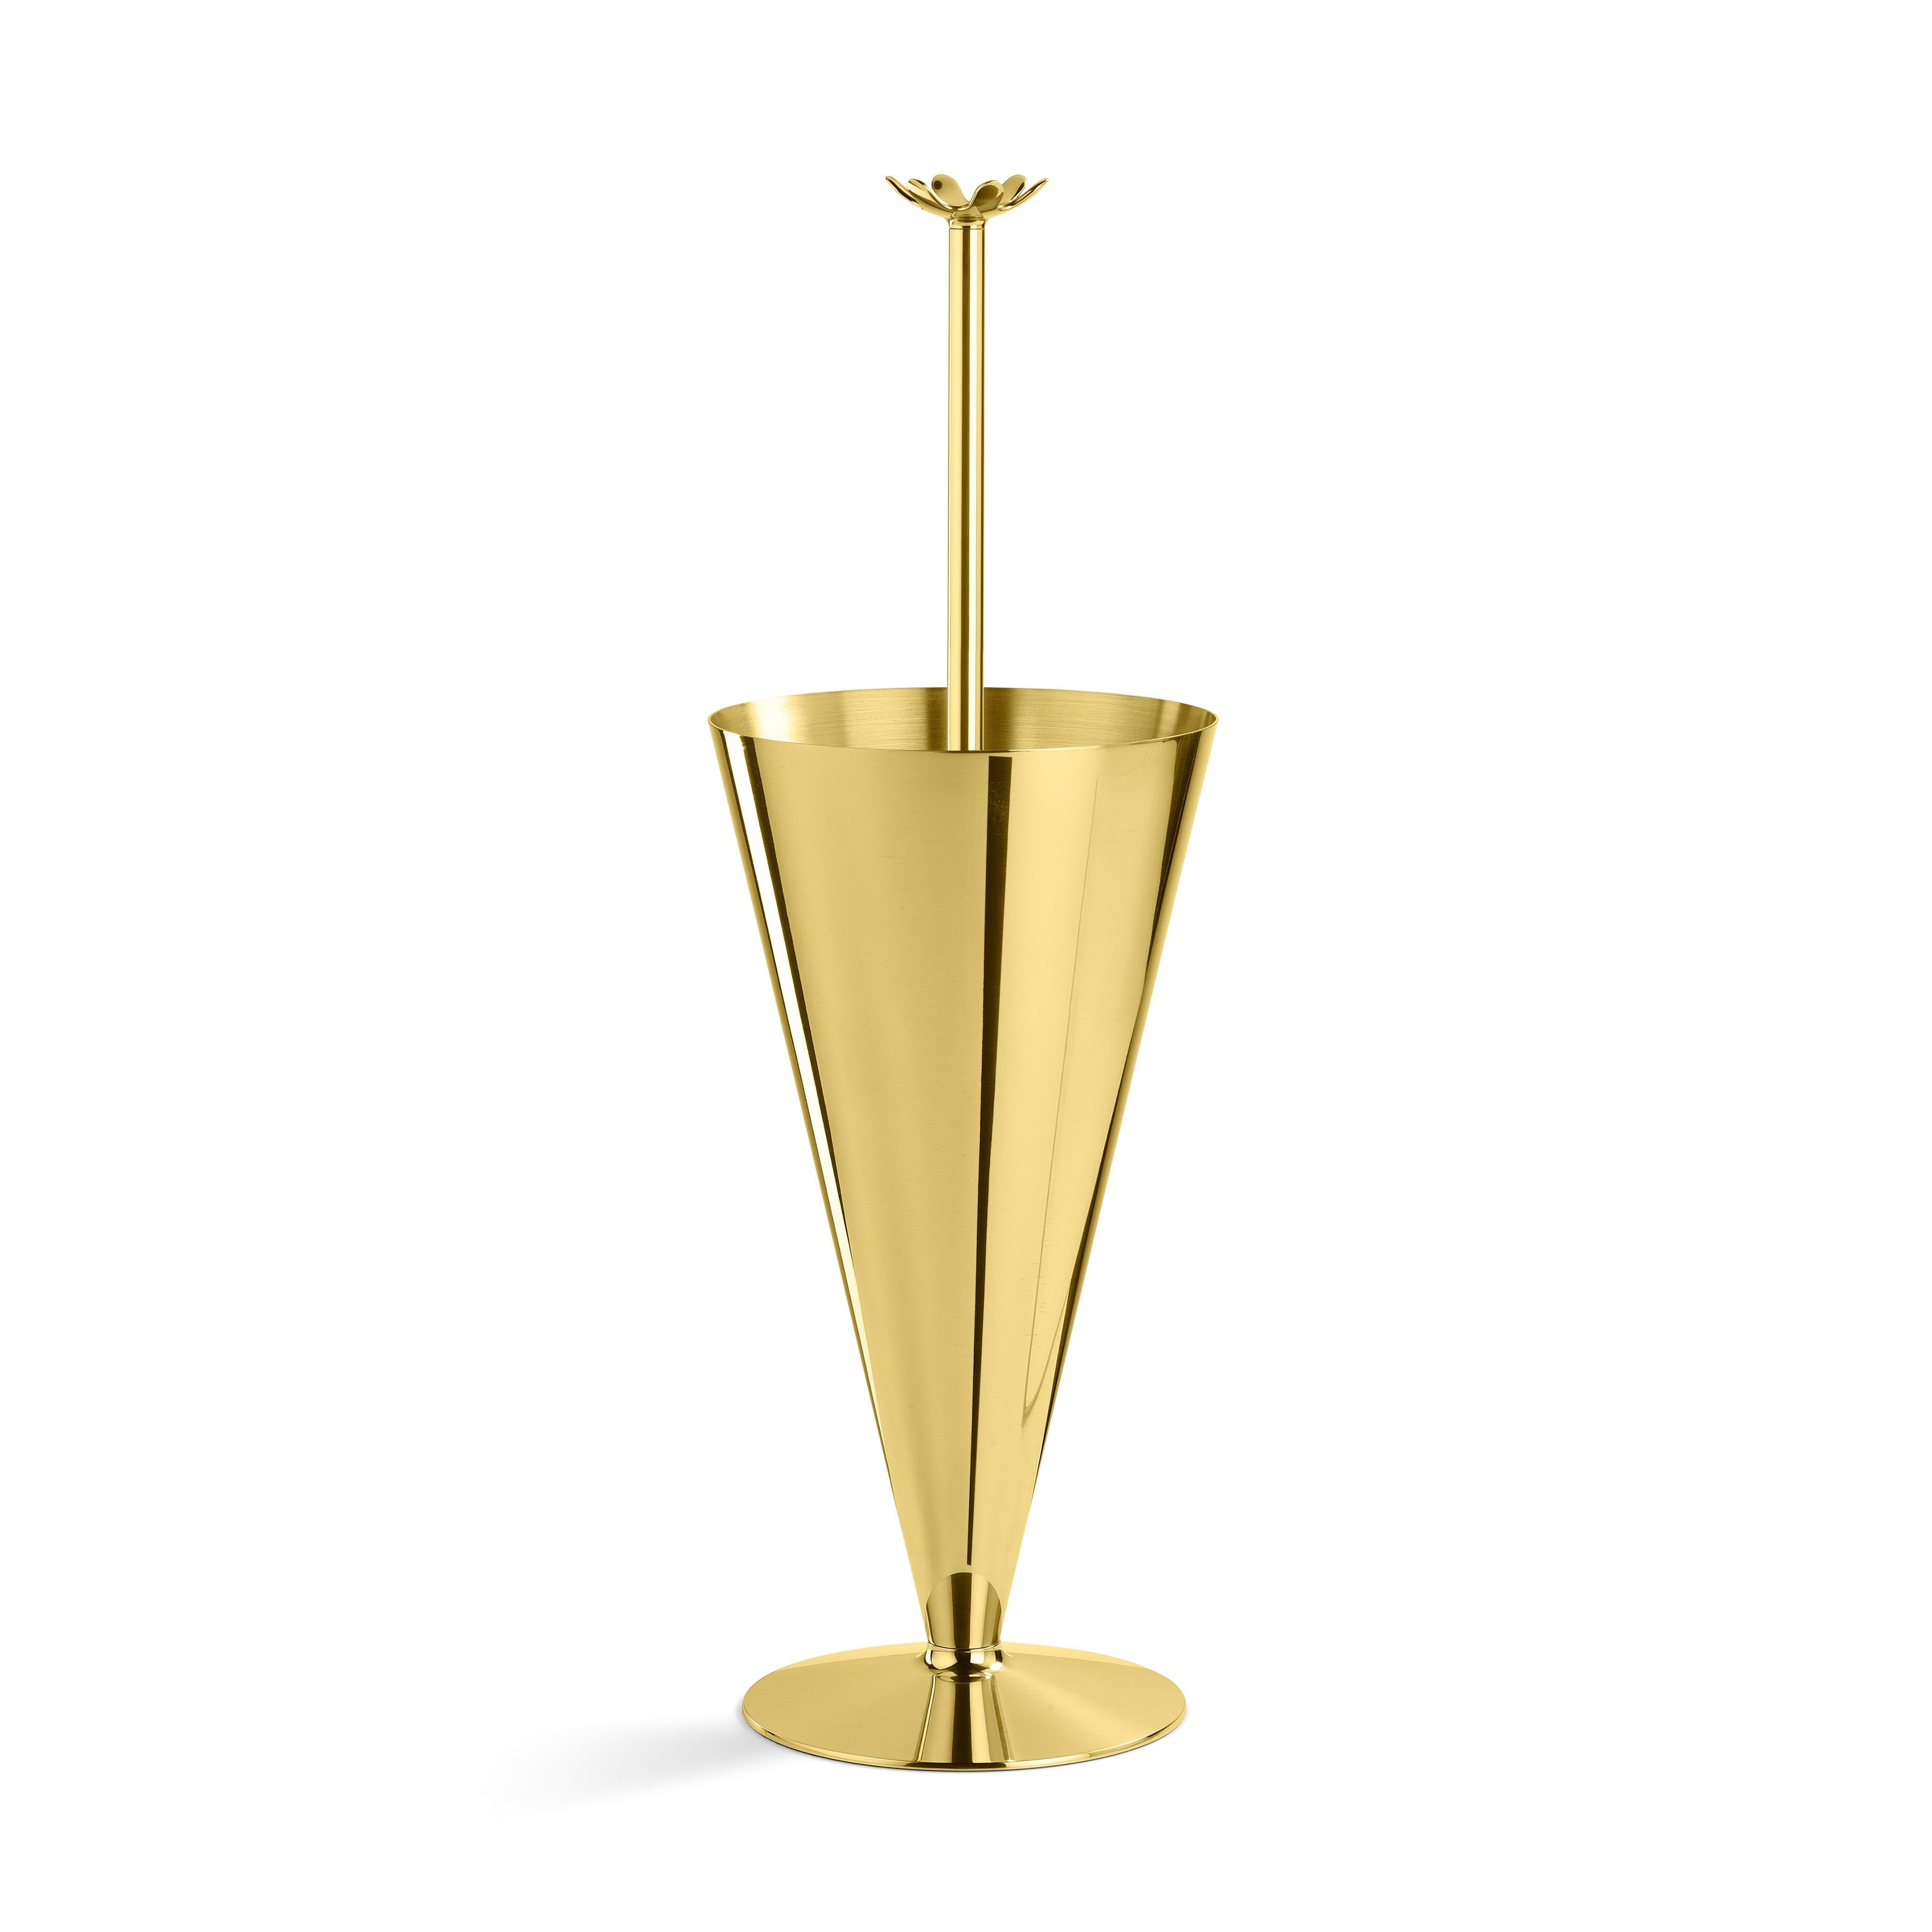 Umbrella stand
Inspiration for this umbrella stand was found in the shape of an umbrella, as can be seen in antique predecessors. The handle has been conceived as a hook for the foldable umbrella's. It’s a contemporary interpretation of a Classic